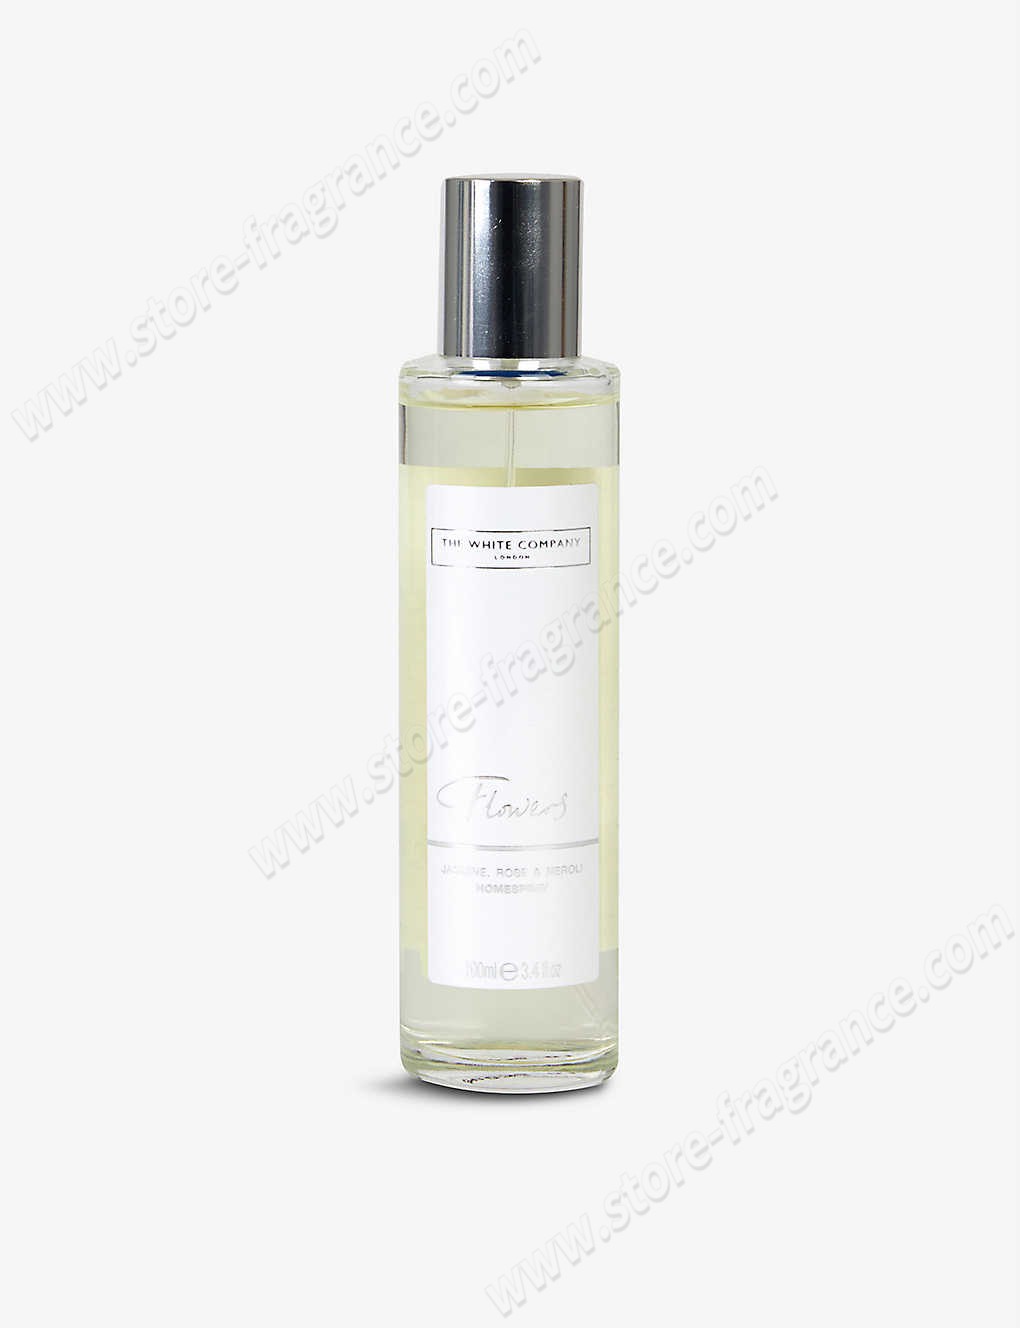 THE WHITE COMPANY/Flowers home spray 100ml Limit Offer - THE WHITE COMPANY/Flowers home spray 100ml Limit Offer